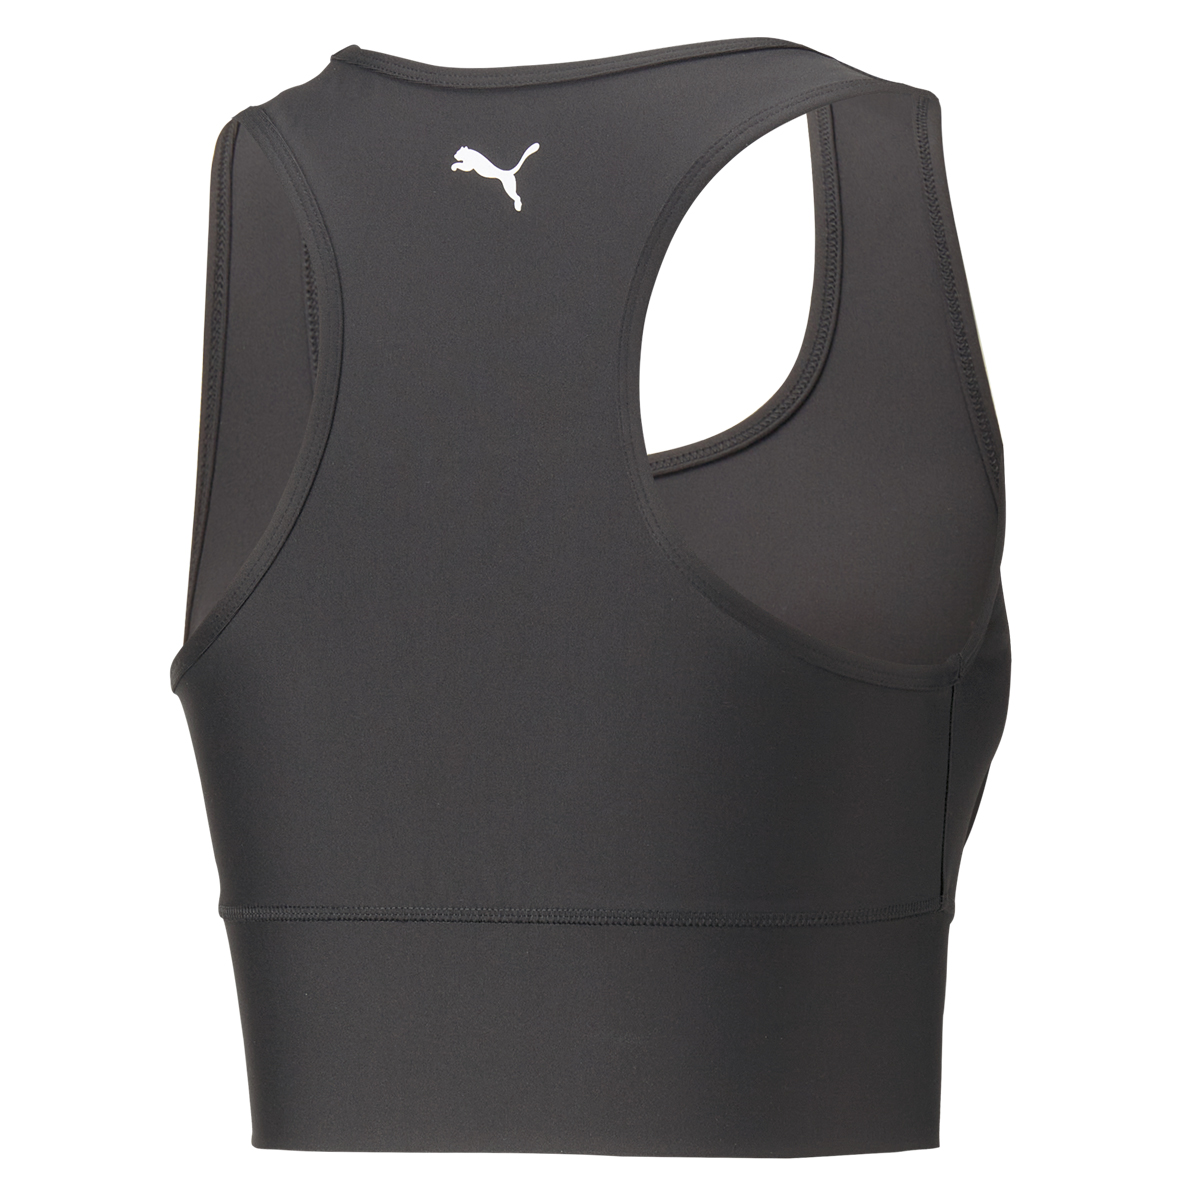 Top Entrenamiento Puma Fit Skimmer Mujer,  image number null